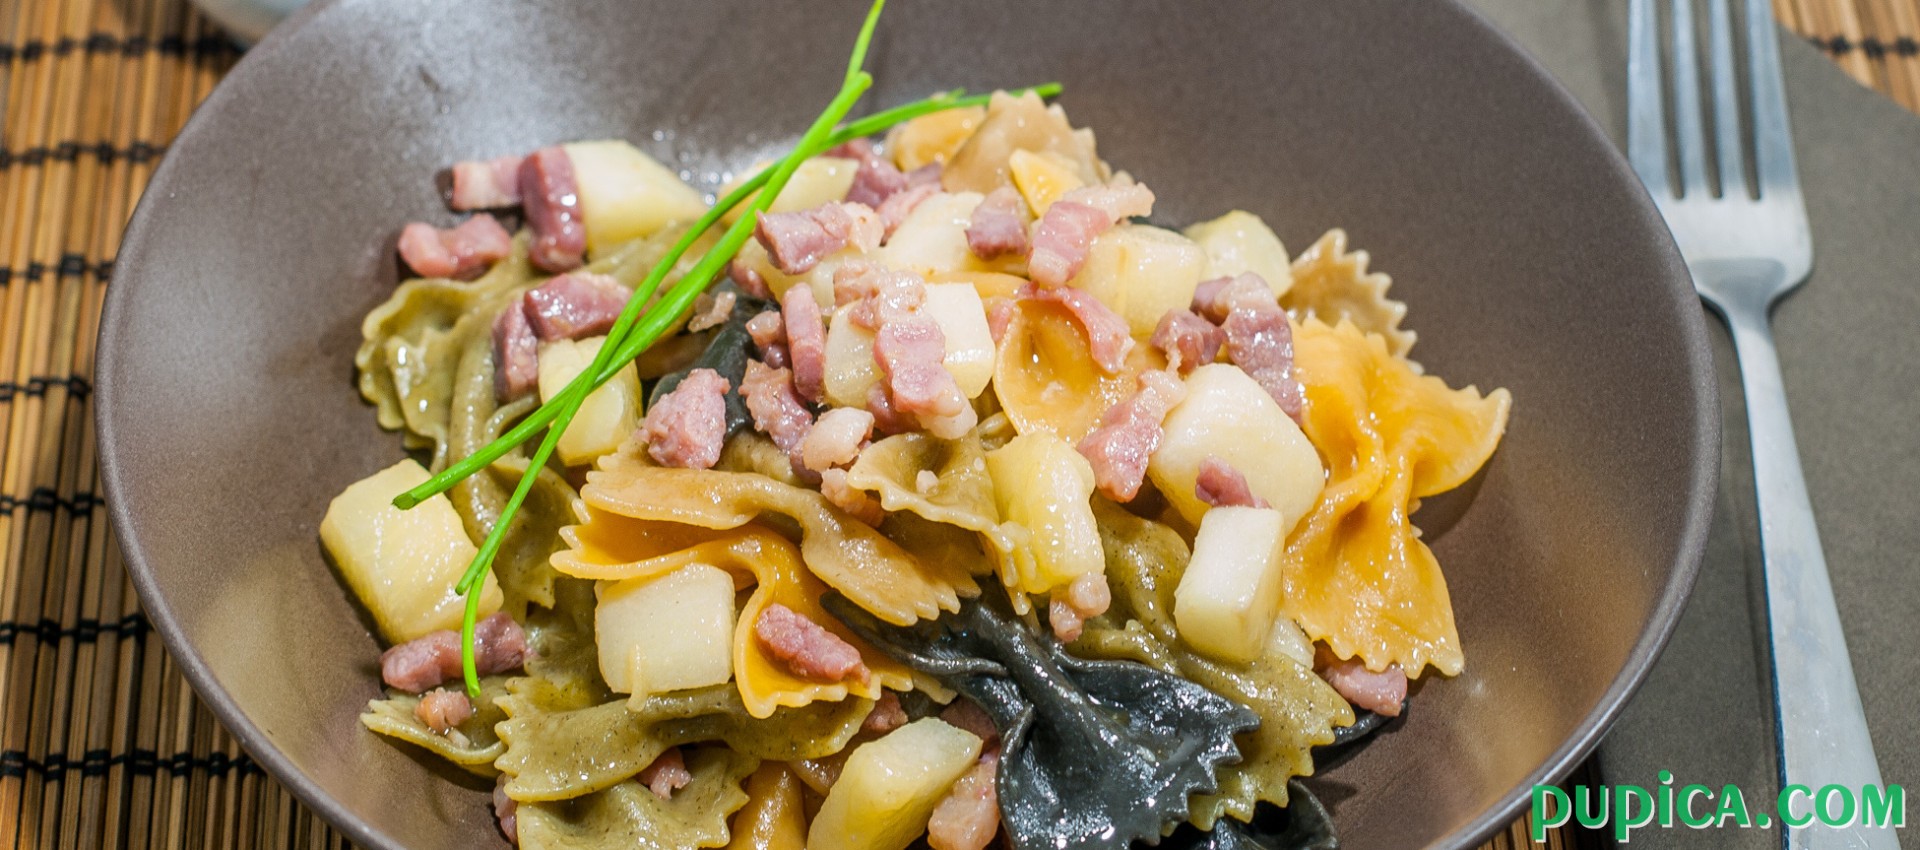 Pasta with pears and bacon